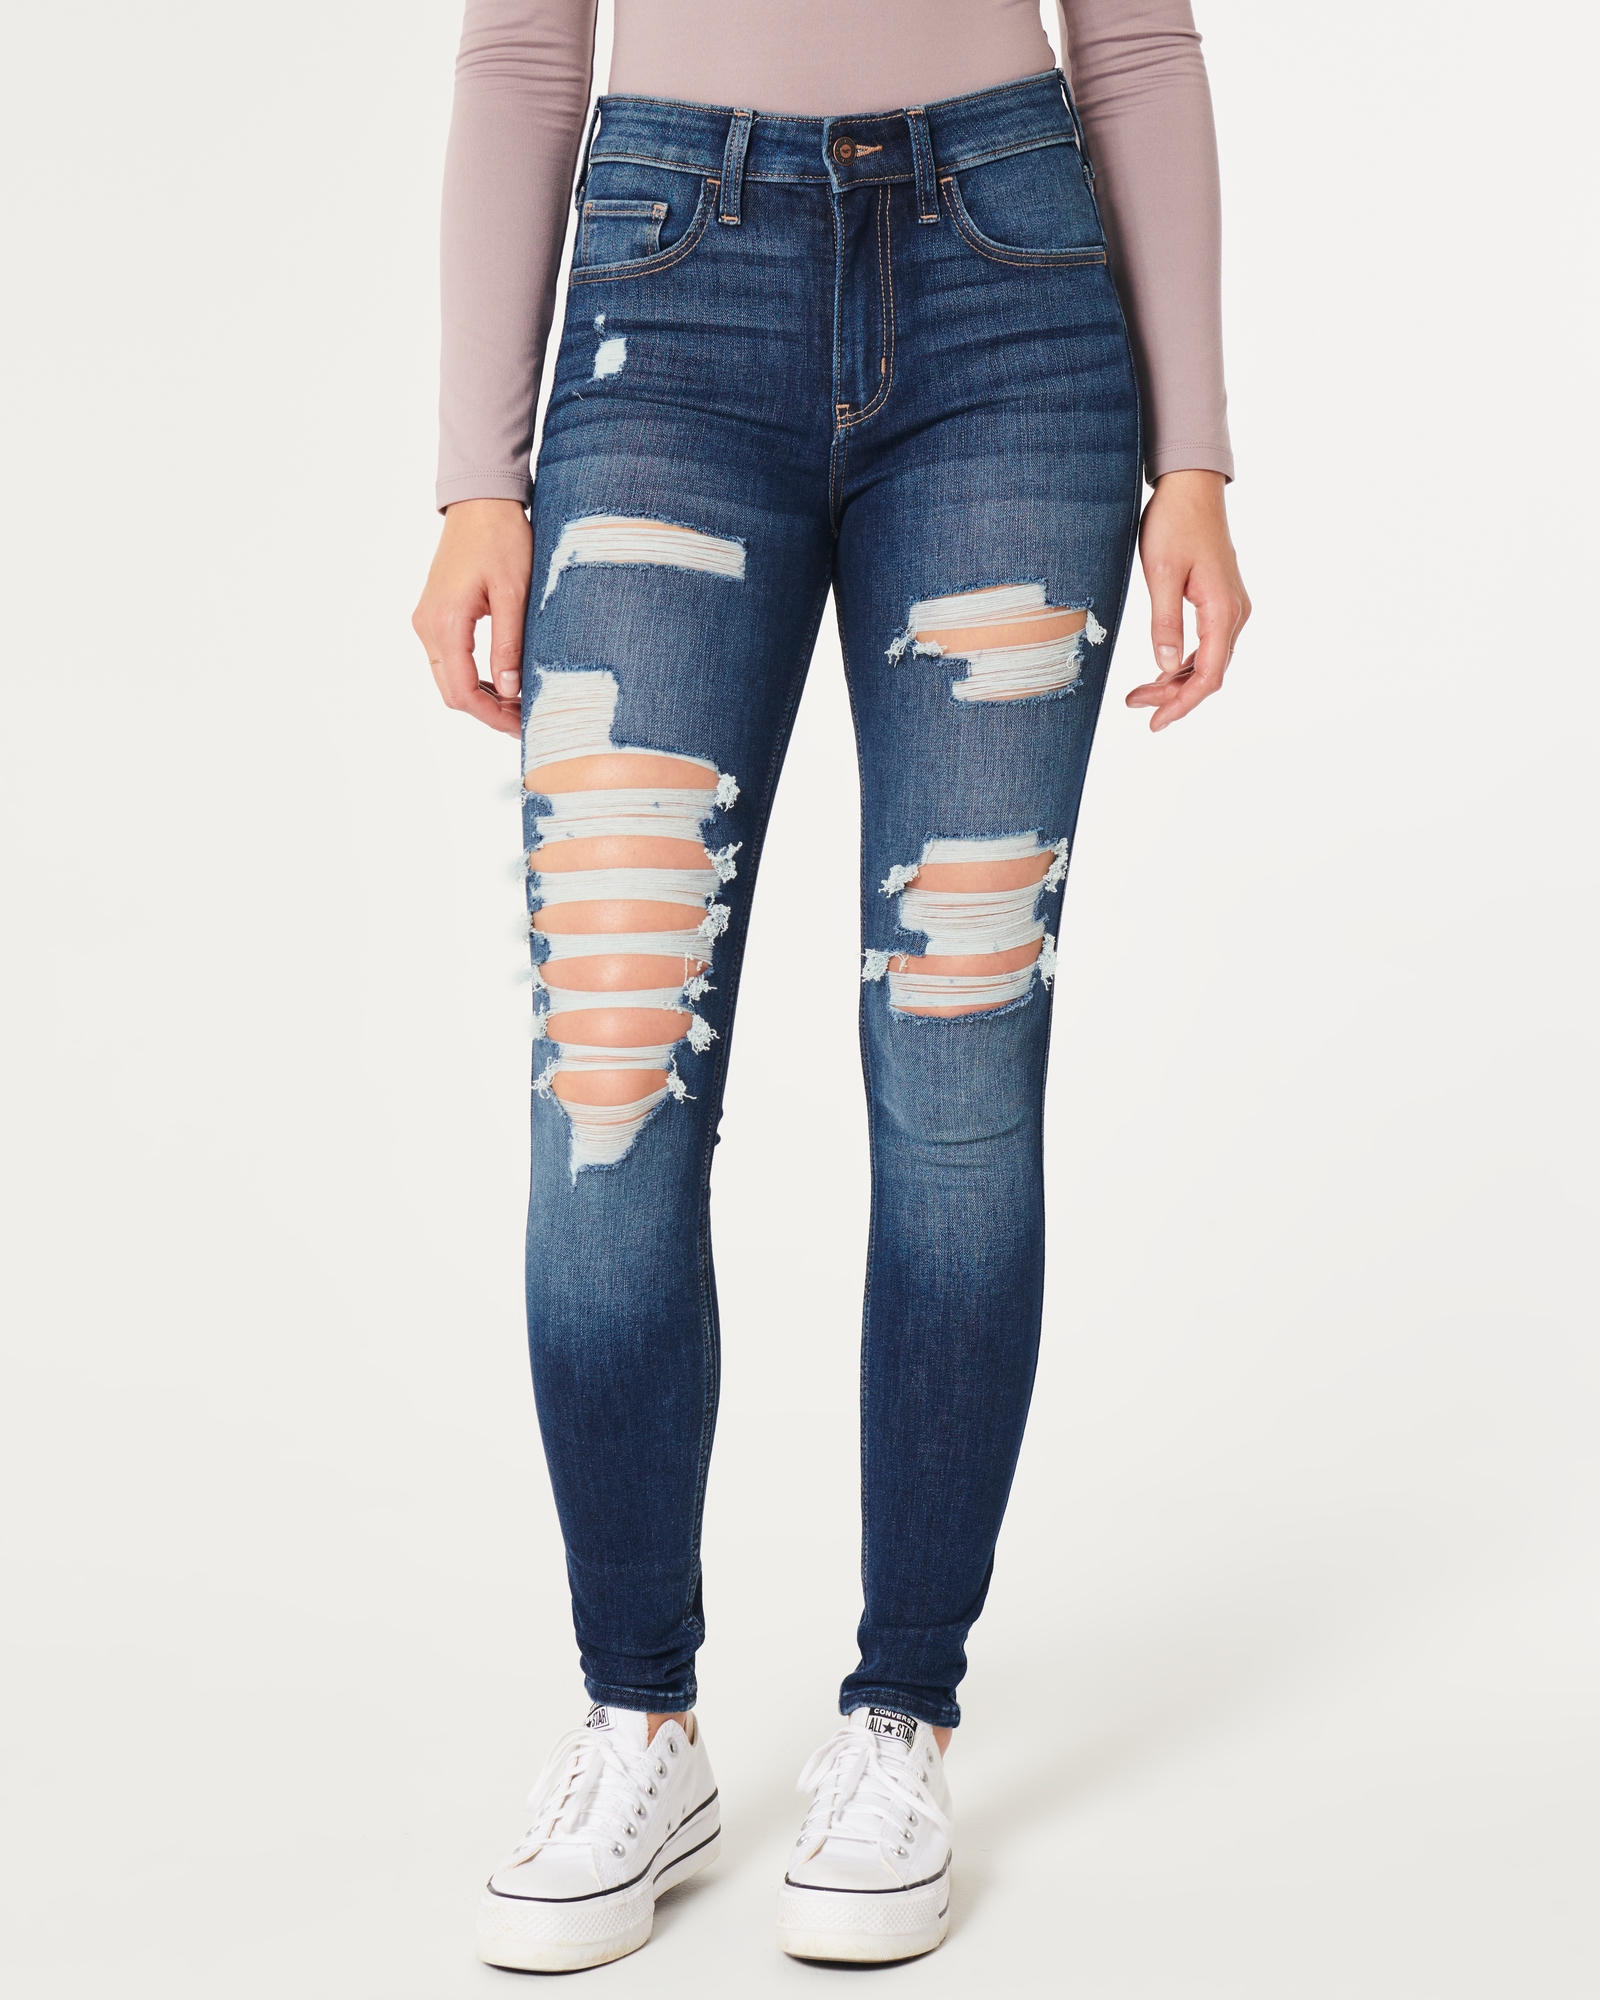 Hollister Women's Size 2 Blue Distressed Skinny Jeans – Treasures